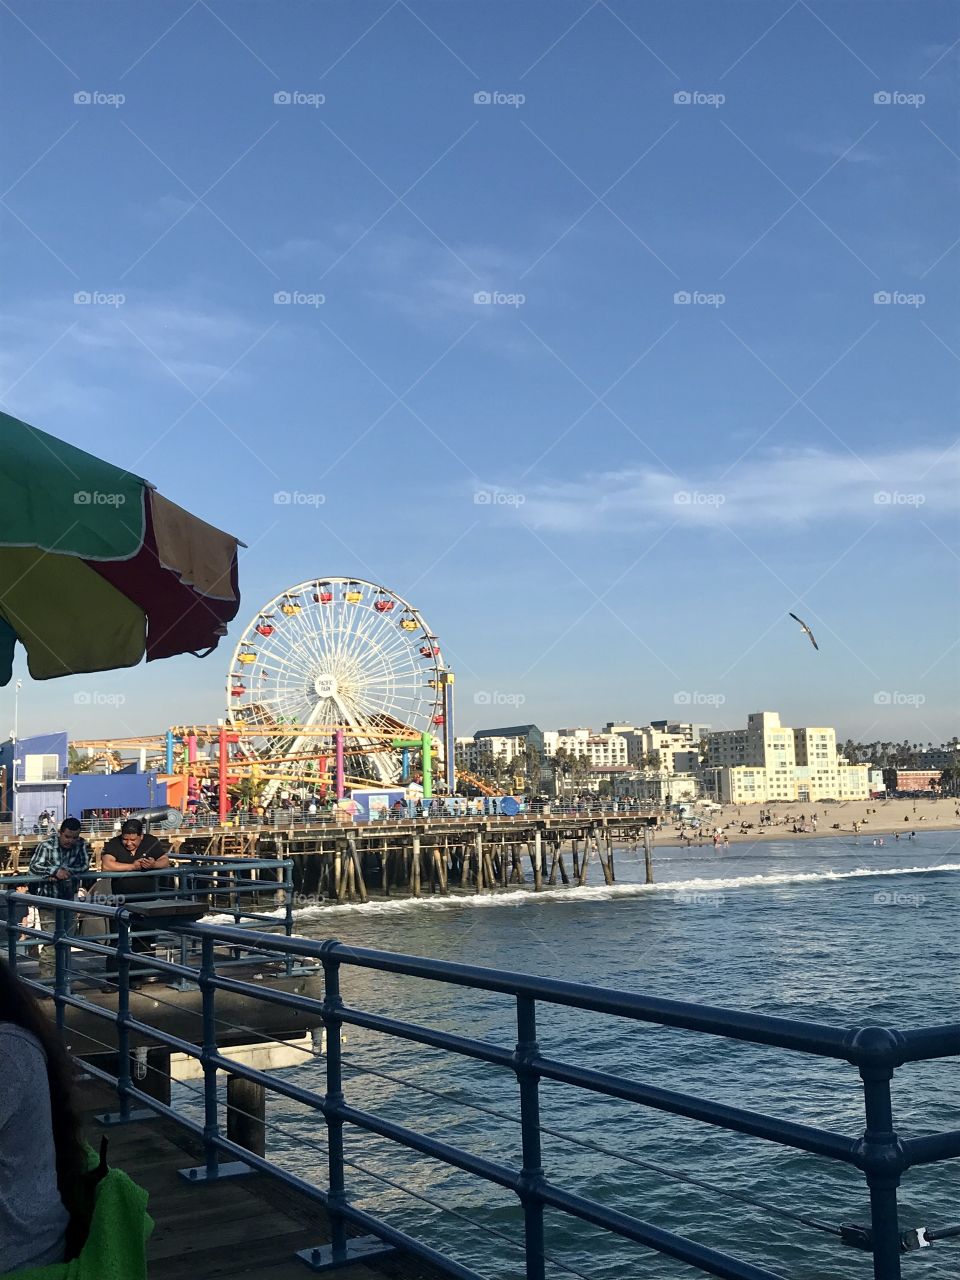 Beautiful view of the Santa Monica pier in Los Angeles california at the beach from the boardwalk